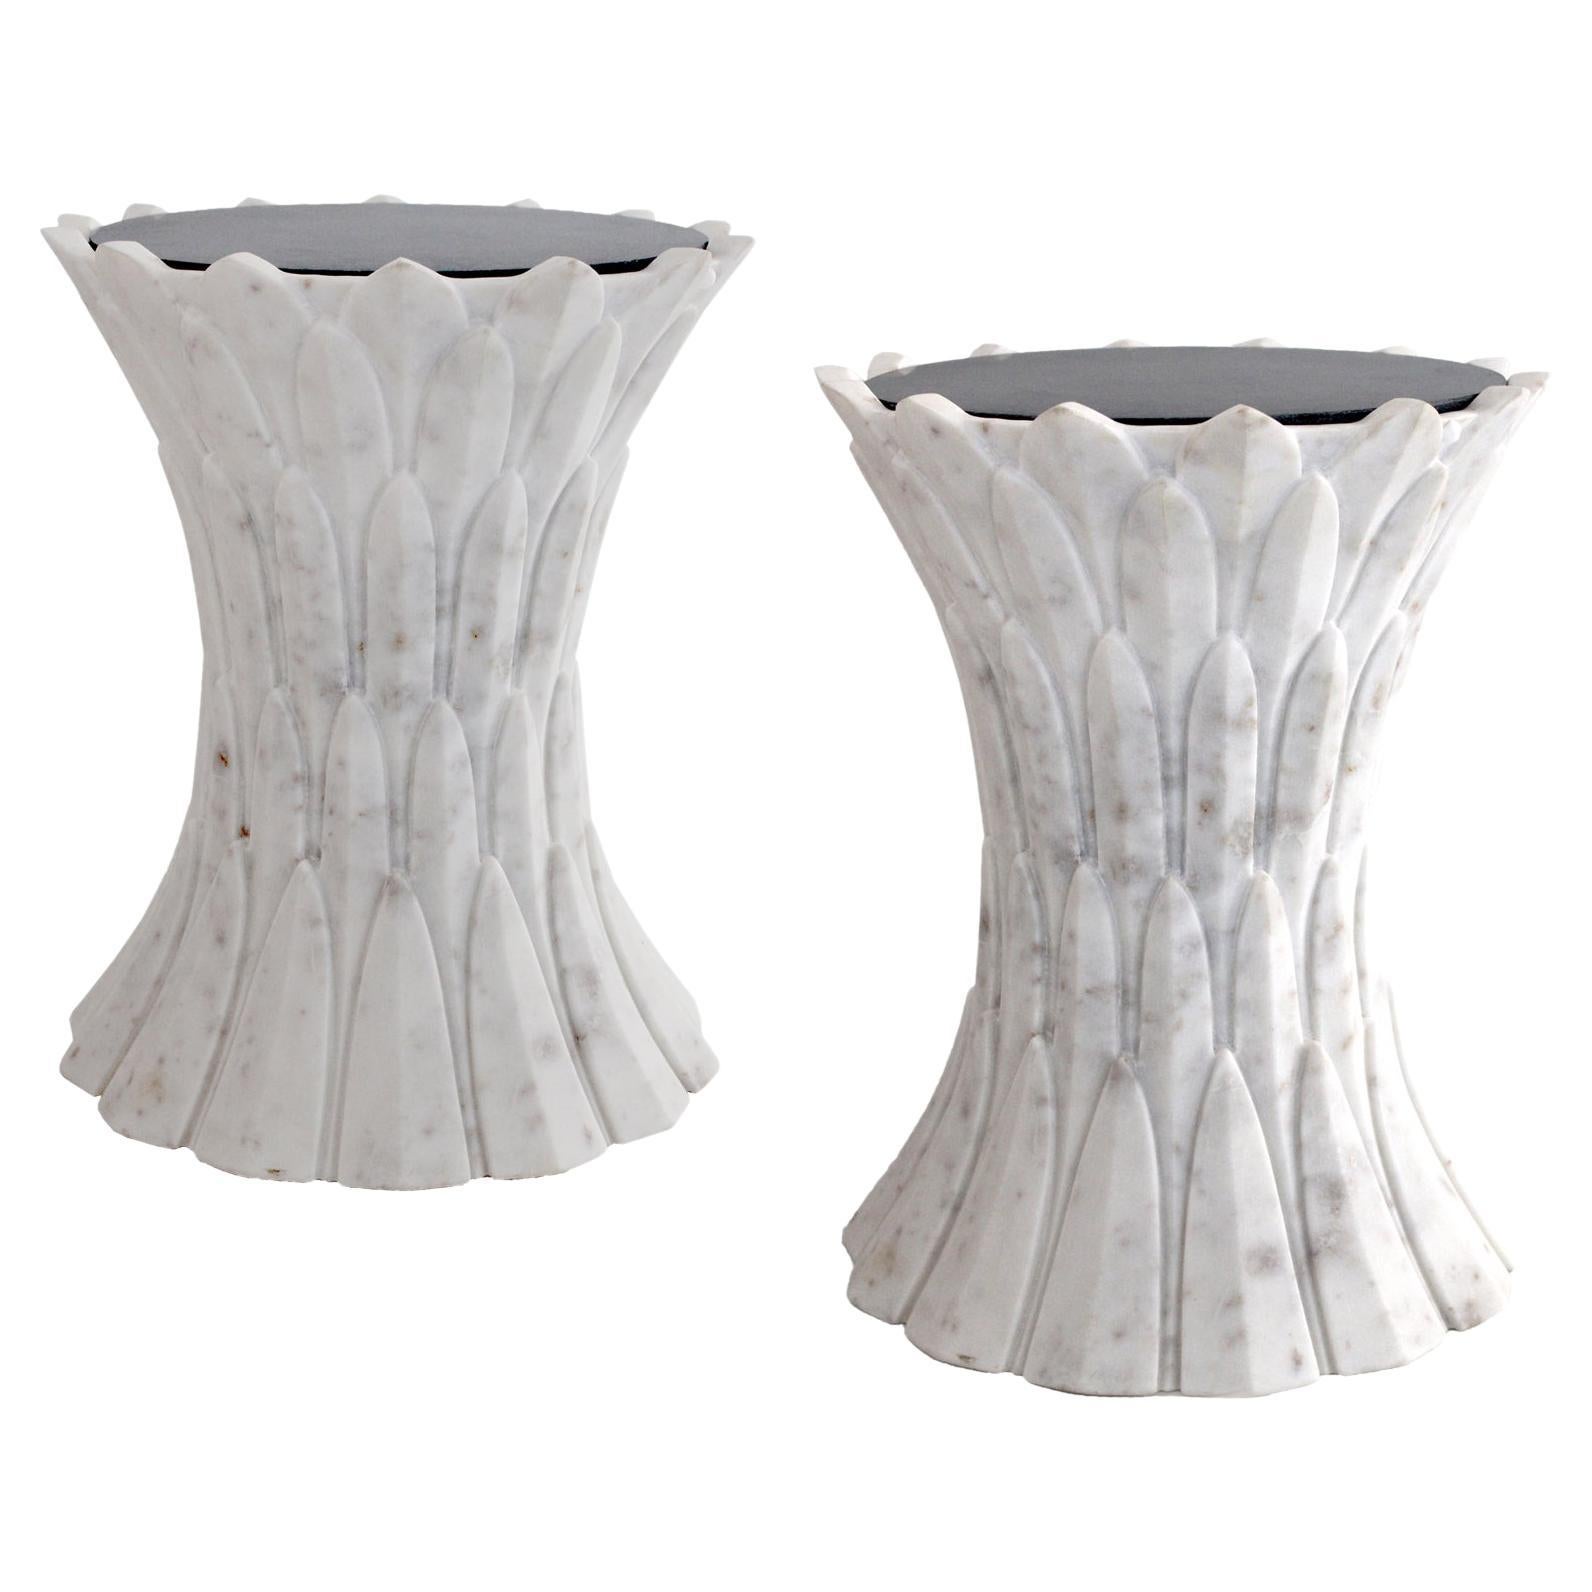 Set of Two Feathers Side Tables in Agra White Marble Handcrafted in India